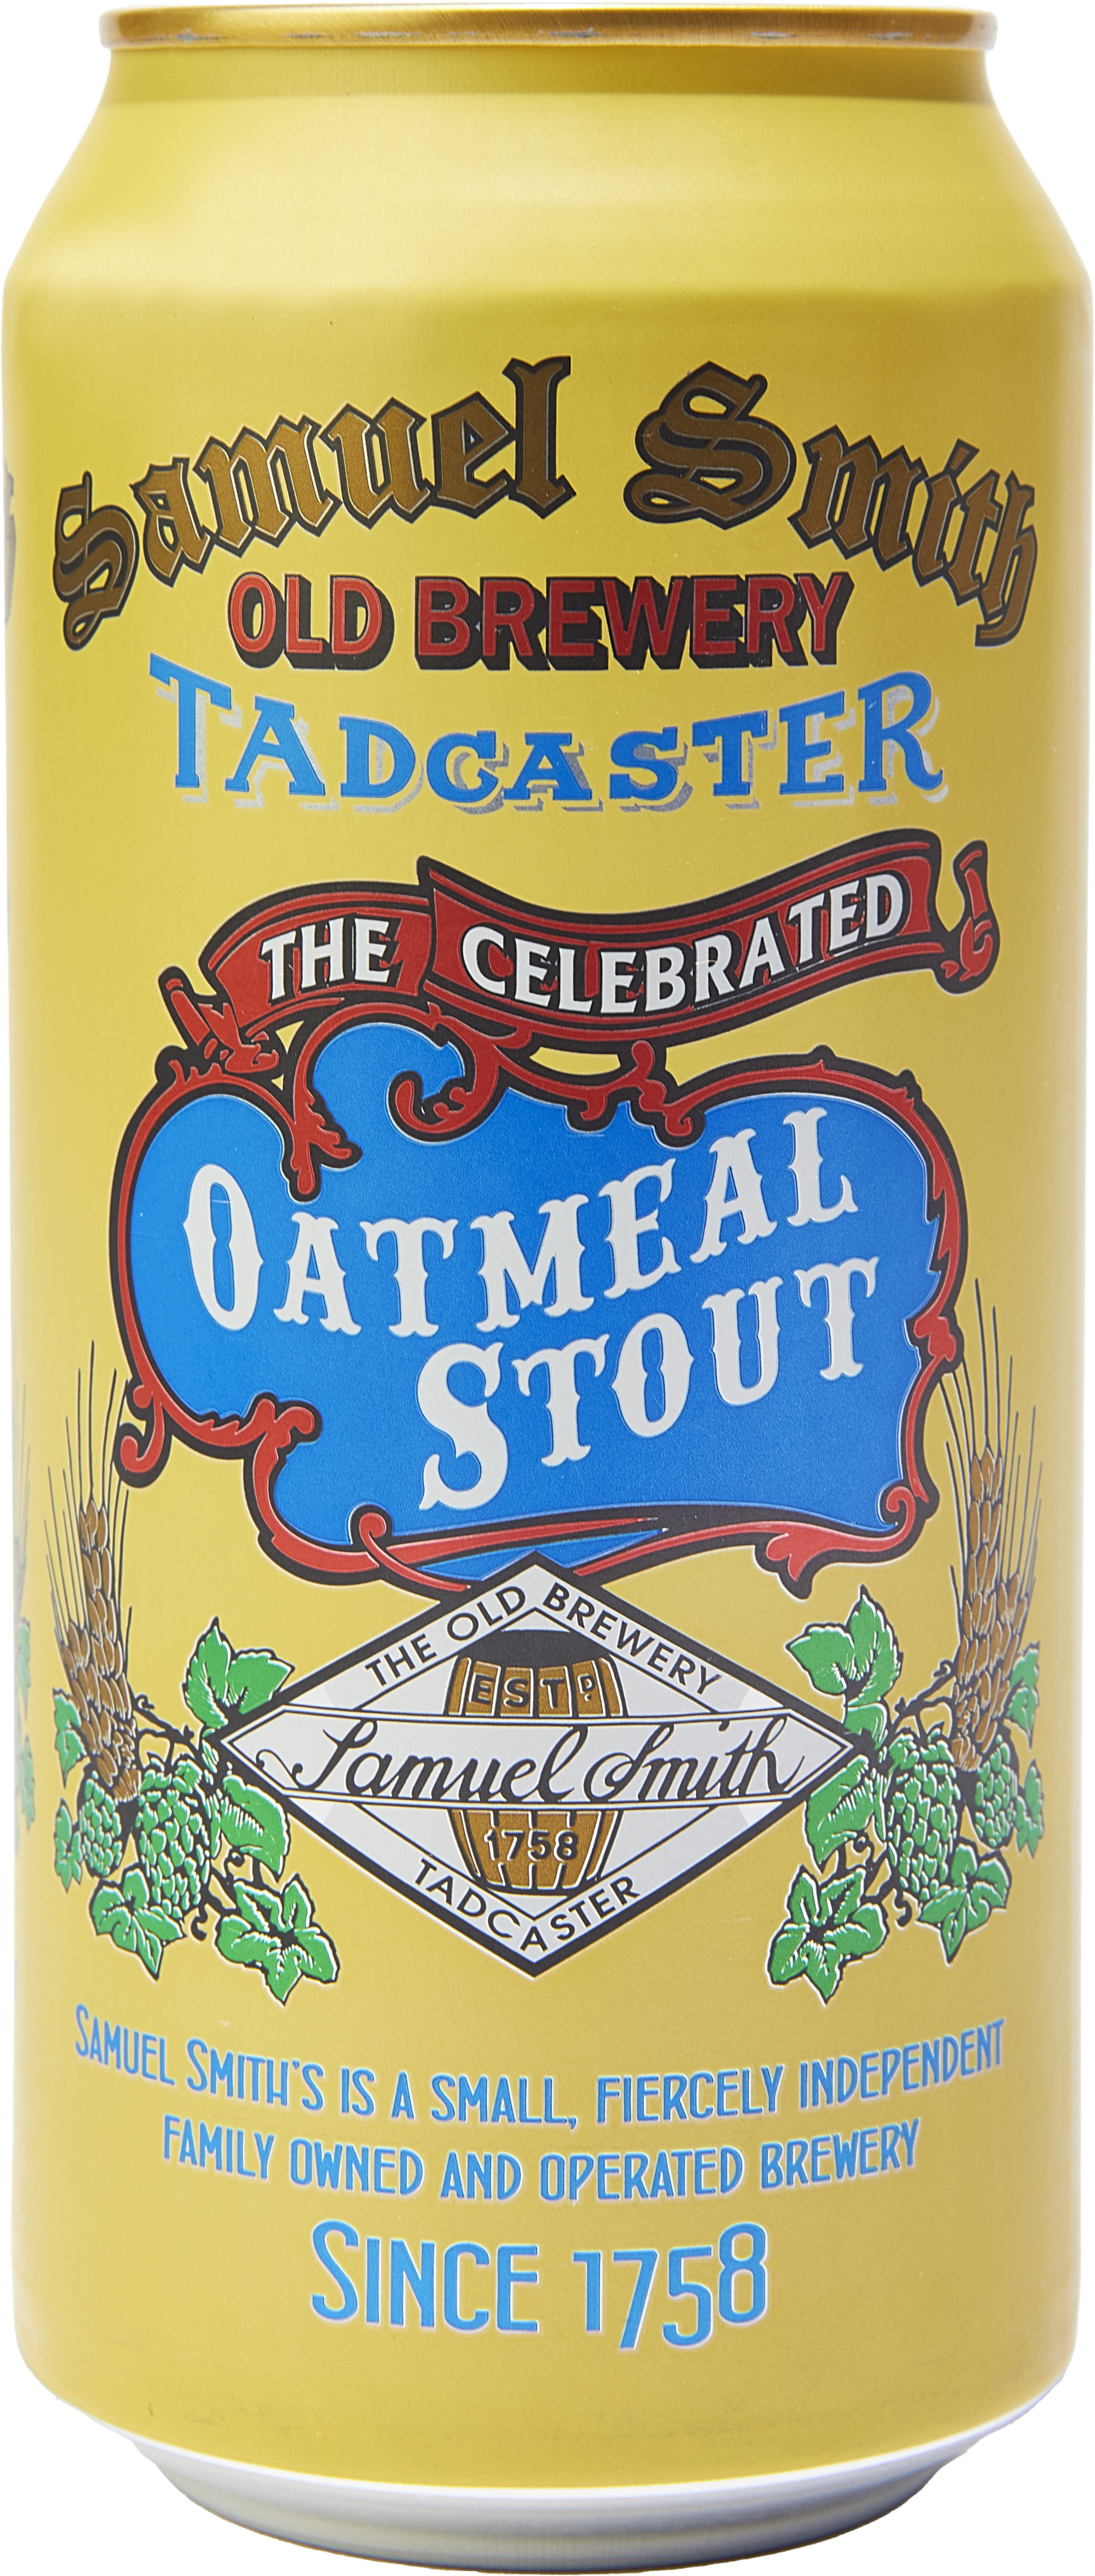 ‘The Celebrated’ Oatmeal Stout is now in cans!